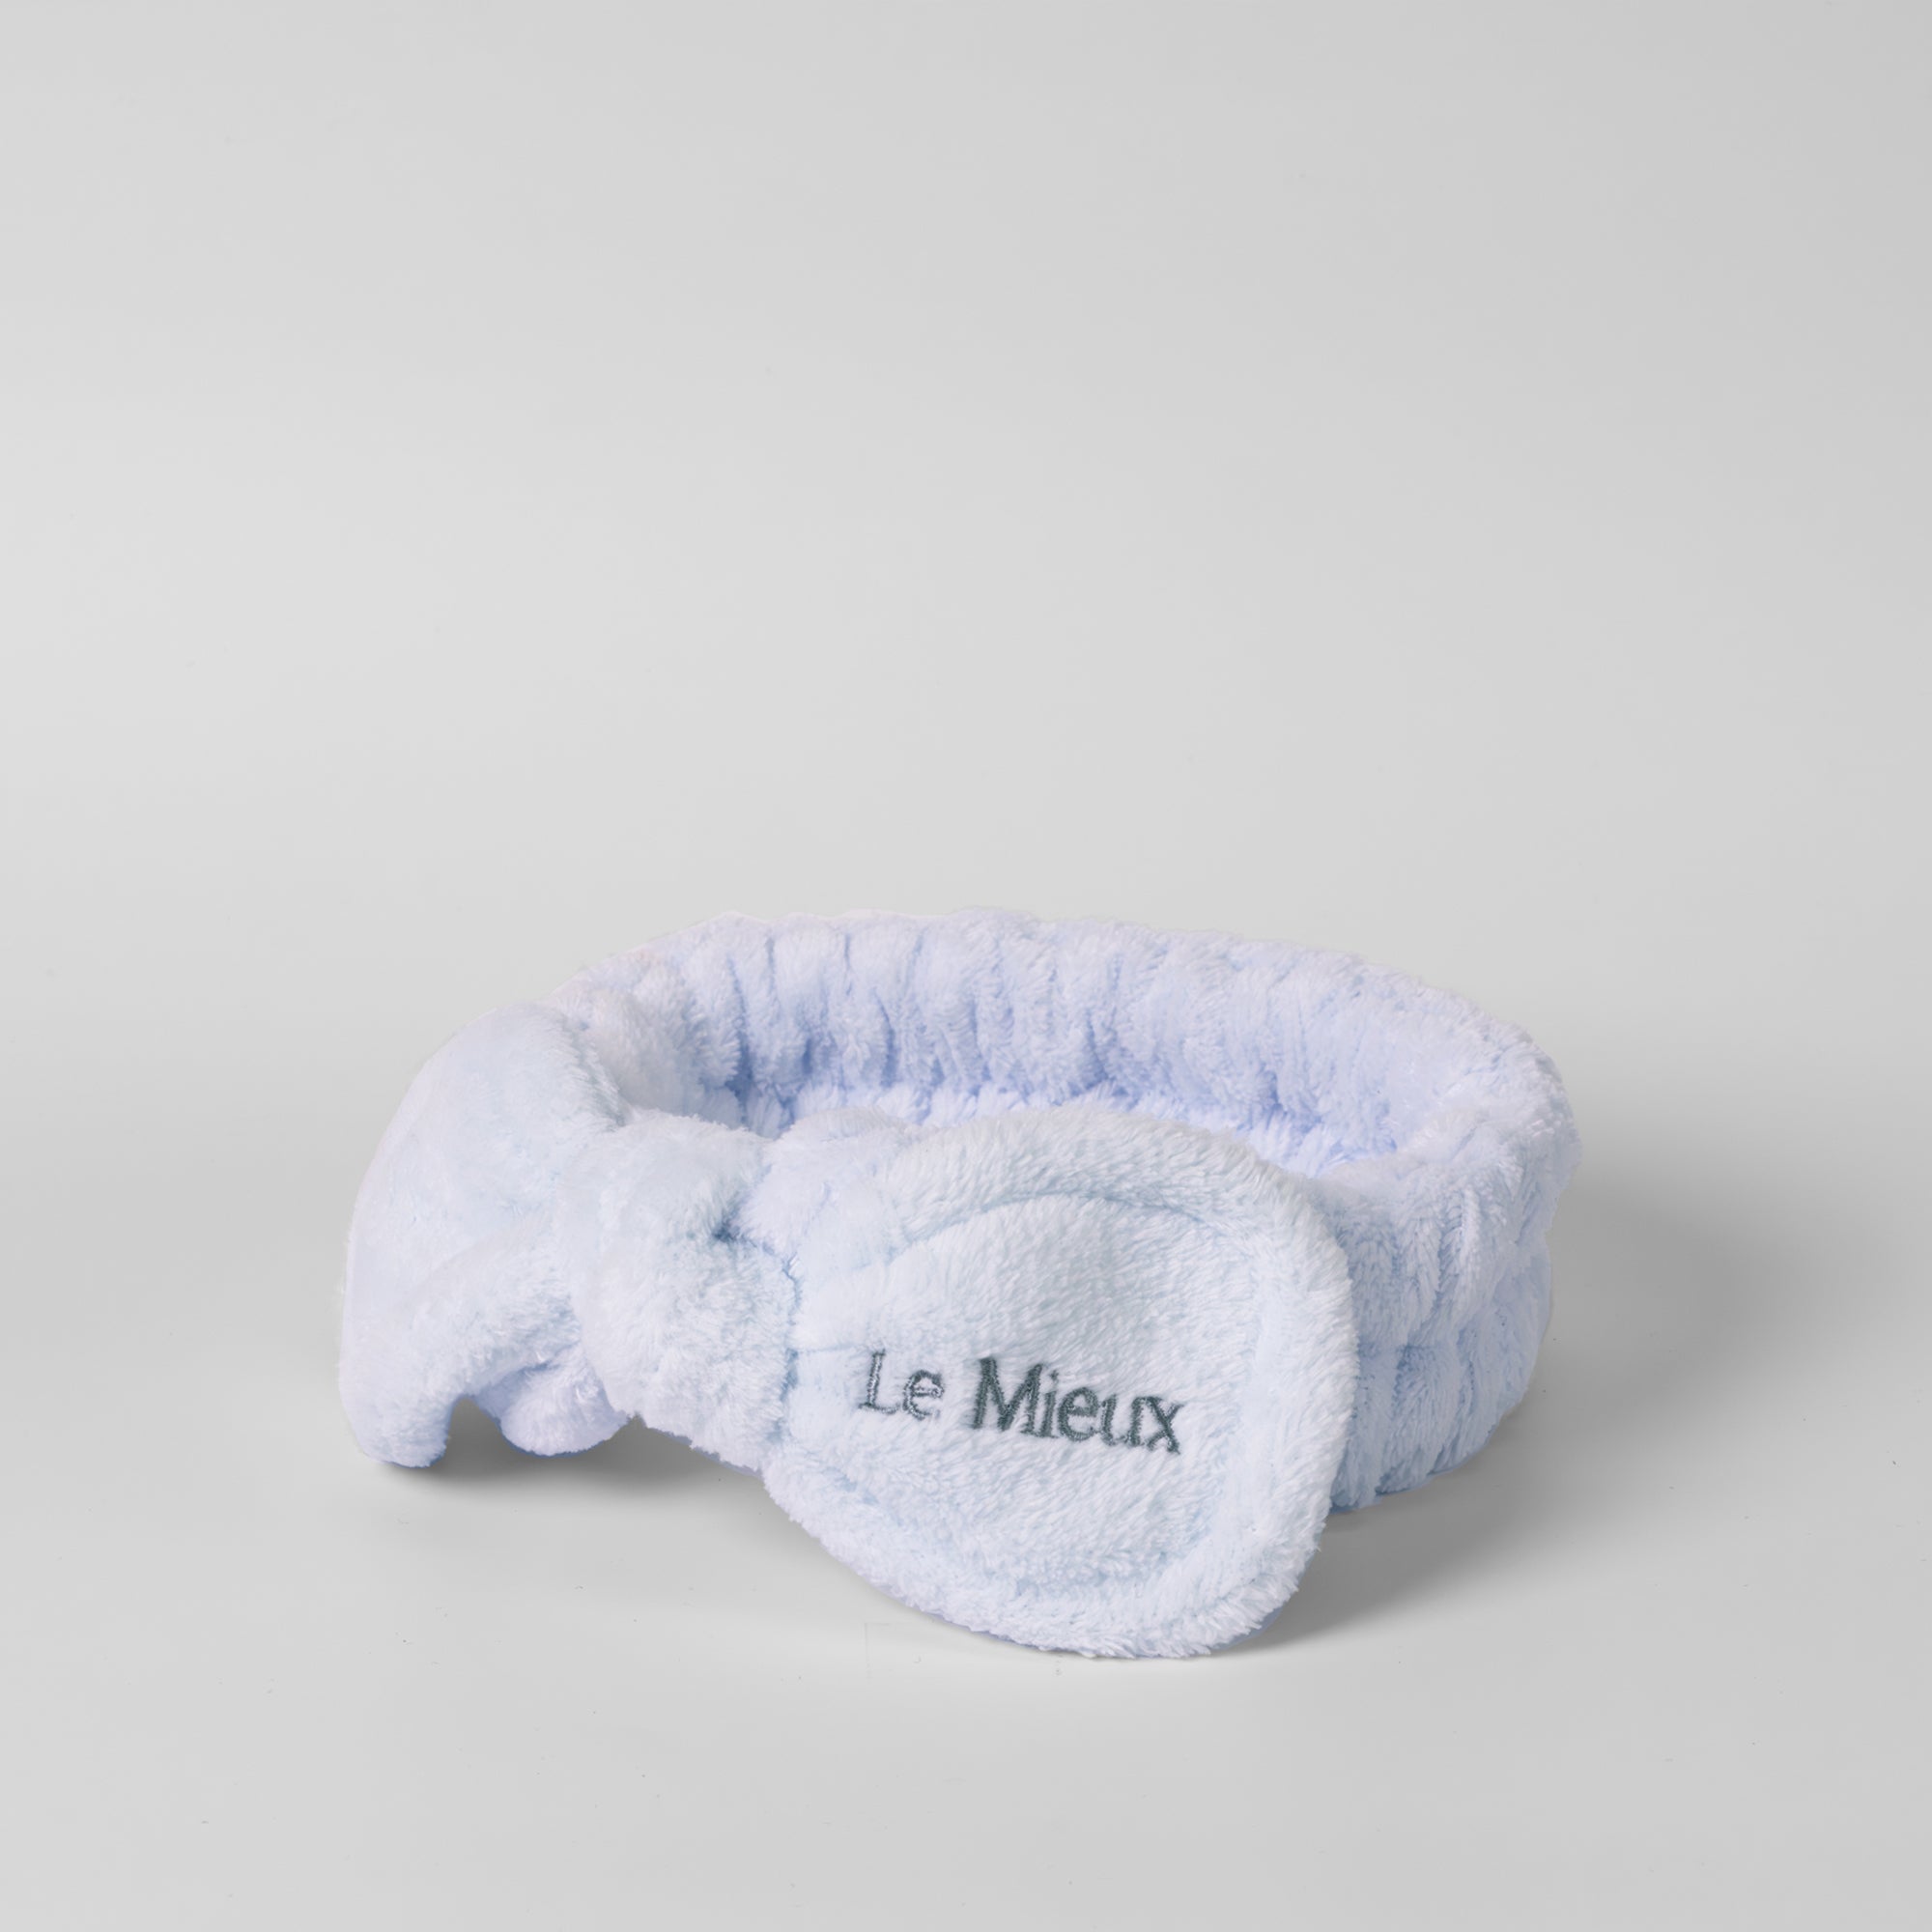  Headband from Le Mieux Skincare - 3